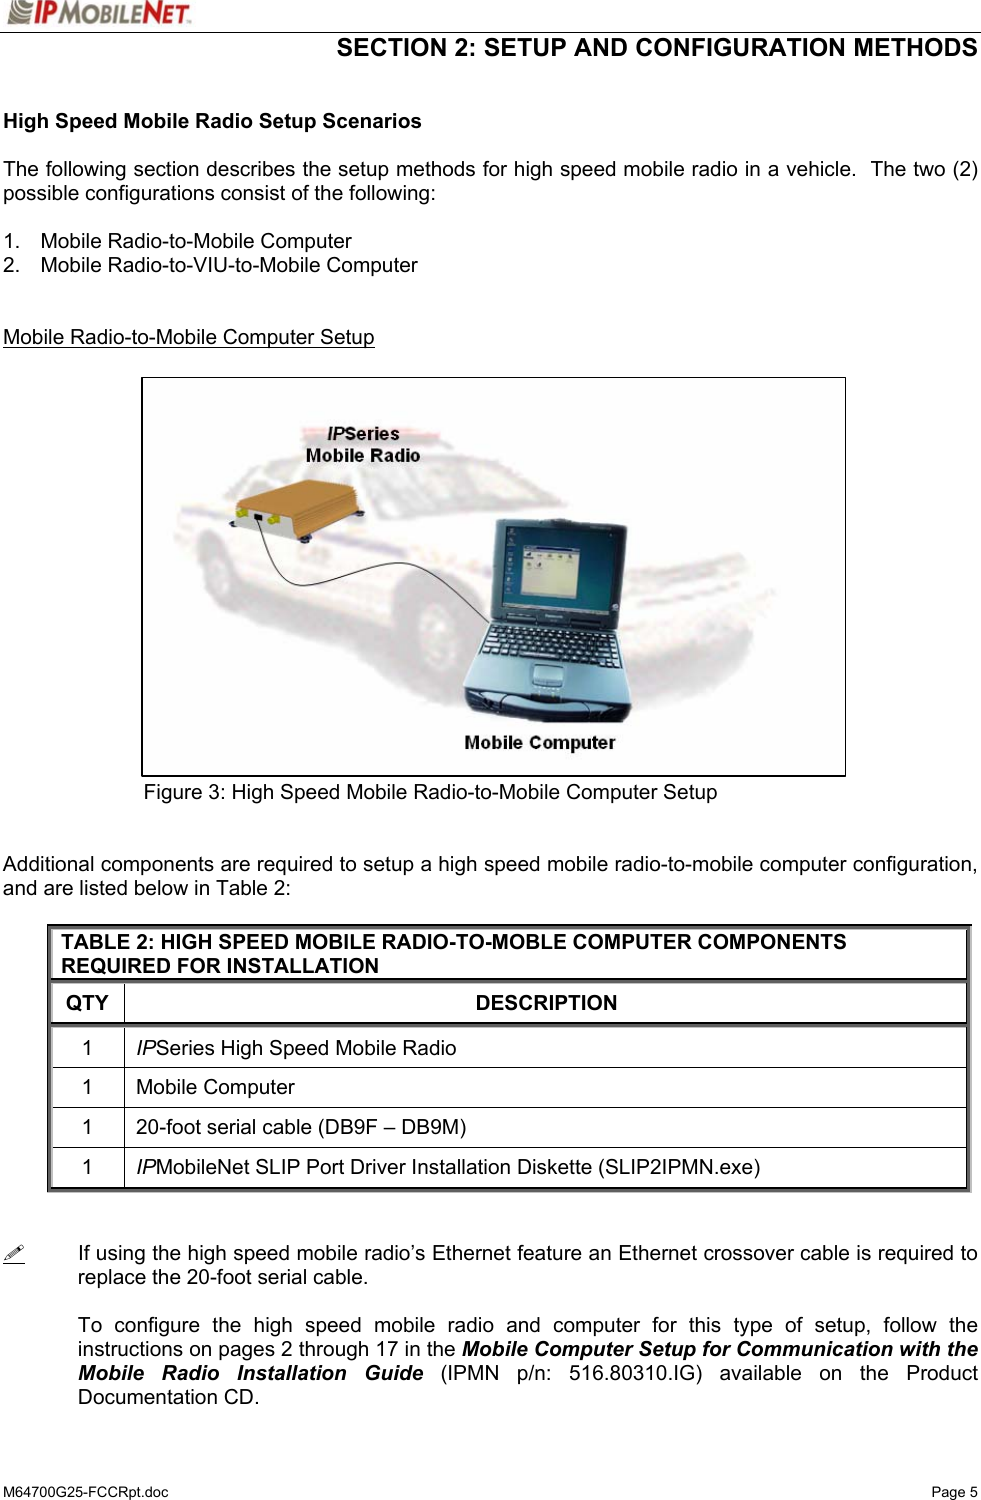  SECTION 2: SETUP AND CONFIGURATION METHODS  M64700G25-FCCRpt.doc   Page 5  High Speed Mobile Radio Setup Scenarios  The following section describes the setup methods for high speed mobile radio in a vehicle.  The two (2) possible configurations consist of the following:  1.  Mobile Radio-to-Mobile Computer 2.  Mobile Radio-to-VIU-to-Mobile Computer   Mobile Radio-to-Mobile Computer Setup                   Figure 3: High Speed Mobile Radio-to-Mobile Computer Setup   Additional components are required to setup a high speed mobile radio-to-mobile computer configuration, and are listed below in Table 2:  TABLE 2: HIGH SPEED MOBILE RADIO-TO-MOBLE COMPUTER COMPONENTS REQUIRED FOR INSTALLATION QTY DESCRIPTION 1  IPSeries High Speed Mobile Radio 1 Mobile Computer 1  20-foot serial cable (DB9F – DB9M) 1  IPMobileNet SLIP Port Driver Installation Diskette (SLIP2IPMN.exe)     If using the high speed mobile radio’s Ethernet feature an Ethernet crossover cable is required to replace the 20-foot serial cable.  To configure the high speed mobile radio and computer for this type of setup, follow the instructions on pages 2 through 17 in the Mobile Computer Setup for Communication with the Mobile Radio Installation Guide (IPMN p/n: 516.80310.IG) available on the Product Documentation CD. 